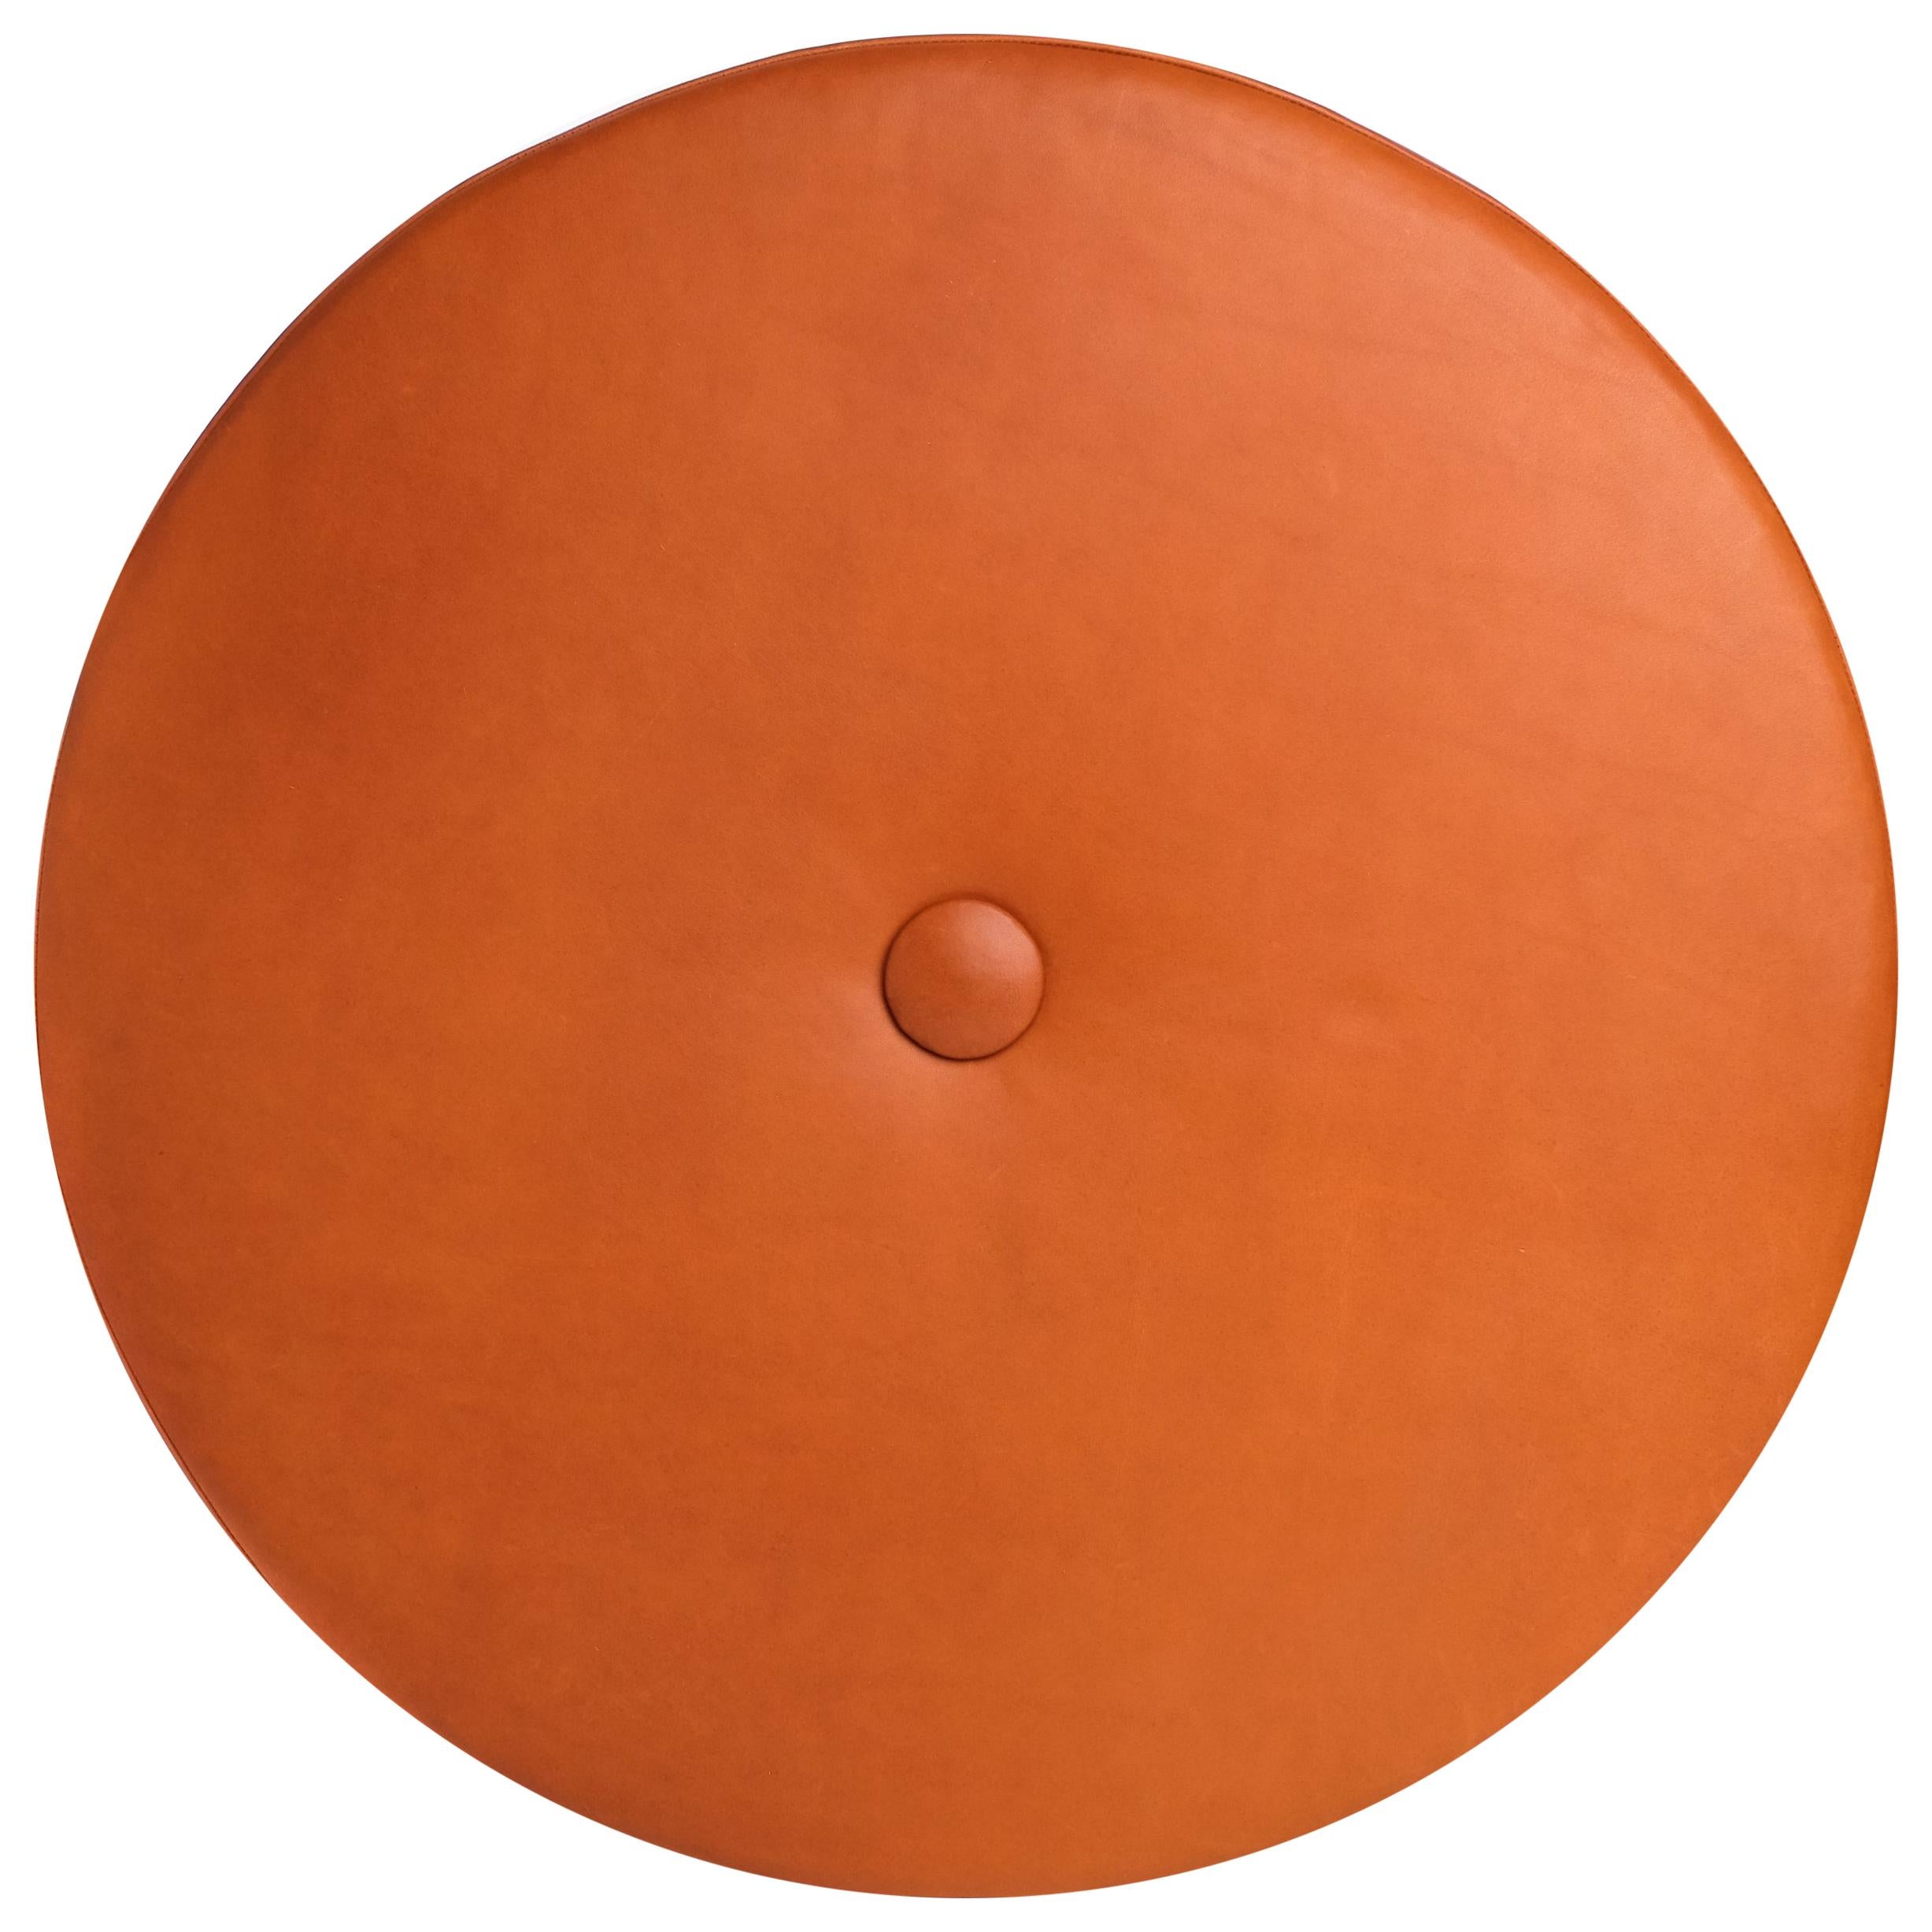 Leather Drum Stacking Floor Cushion 30" in Saddle by Moses Nadel